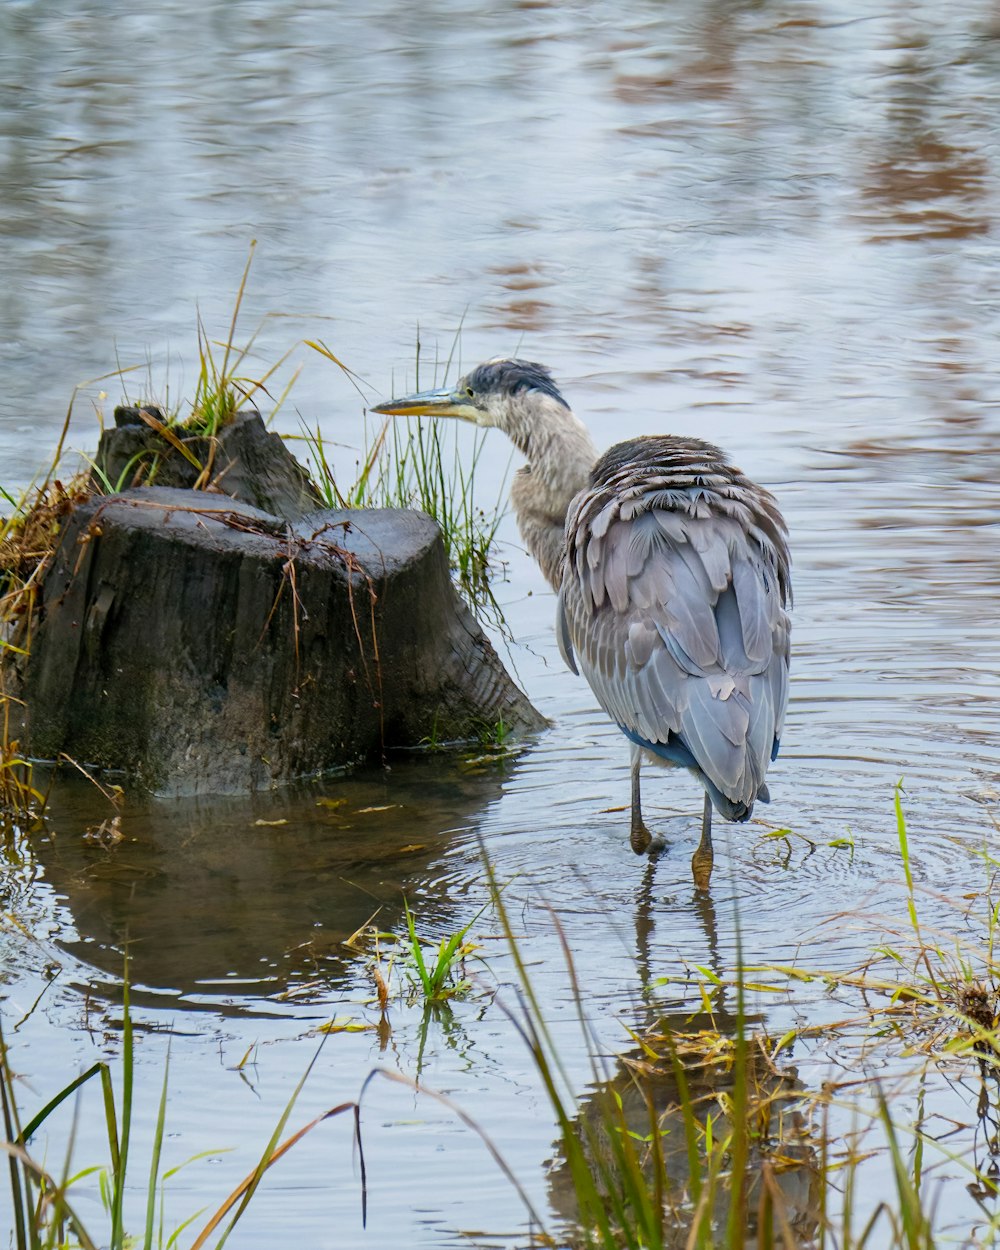 a bird standing on a log in the water